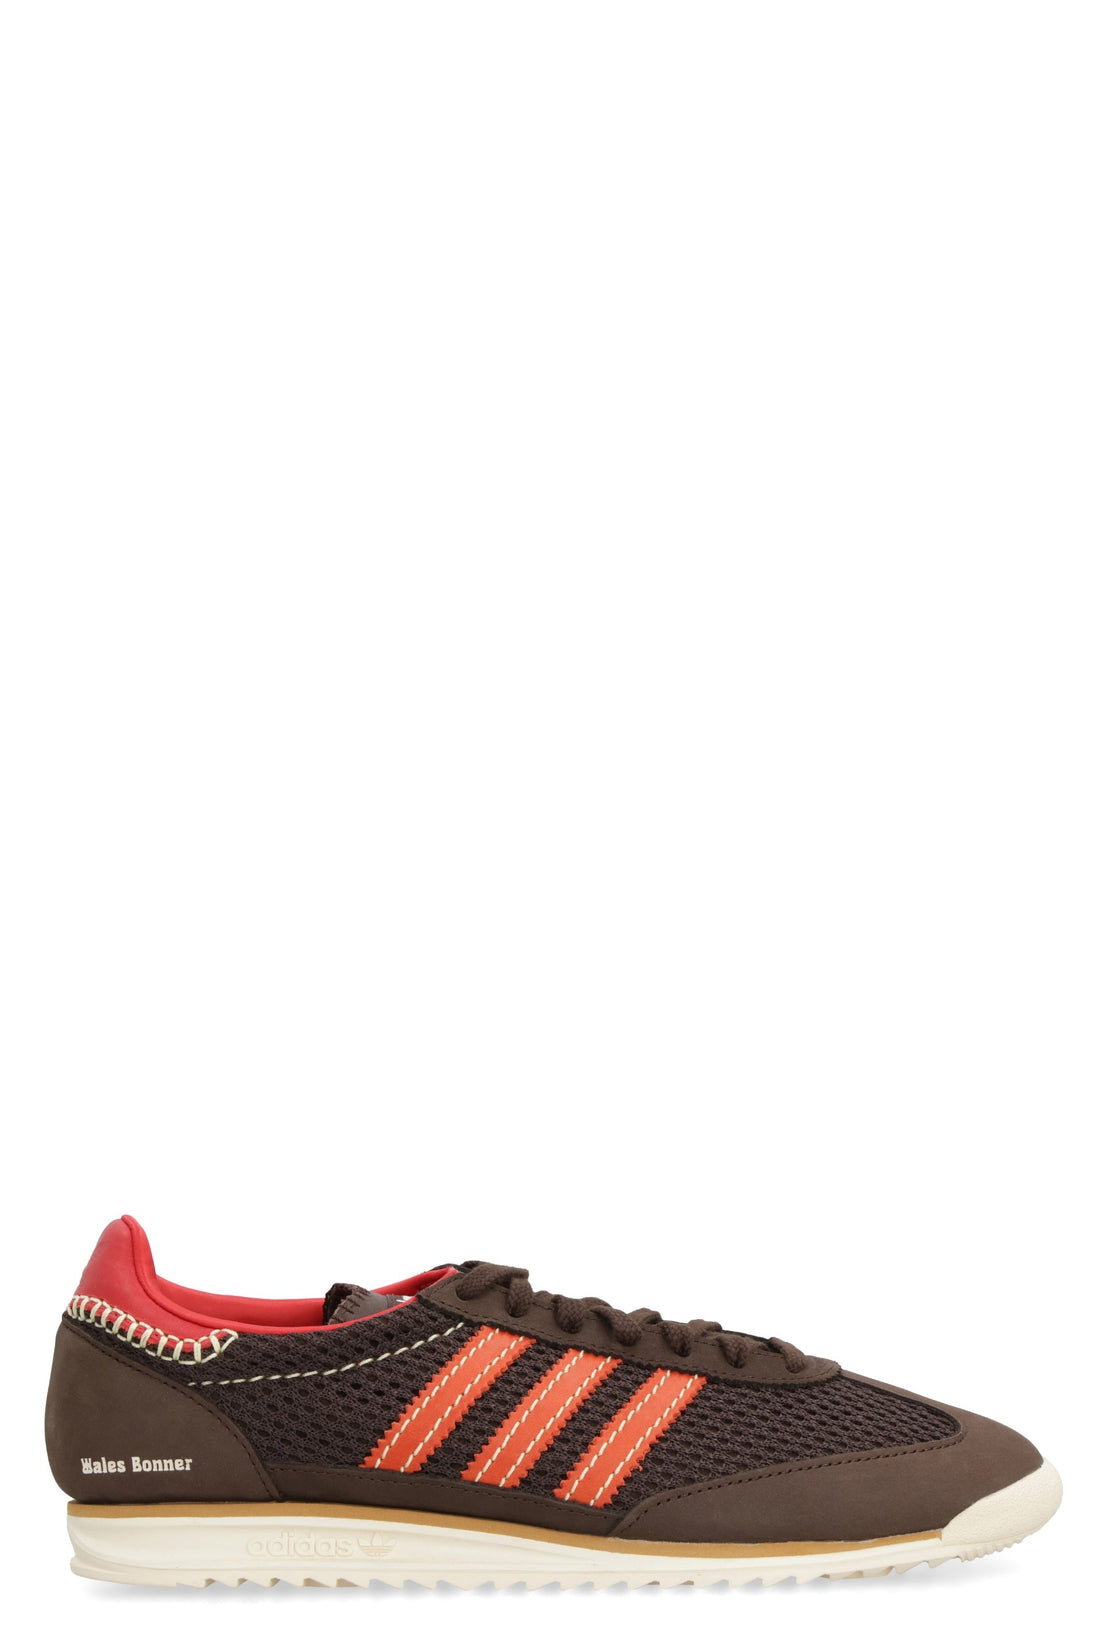 adidas-OUTLET-SALE-adidas Originals by Wales Bonner - SL72 low-top sneakers-ARCHIVIST